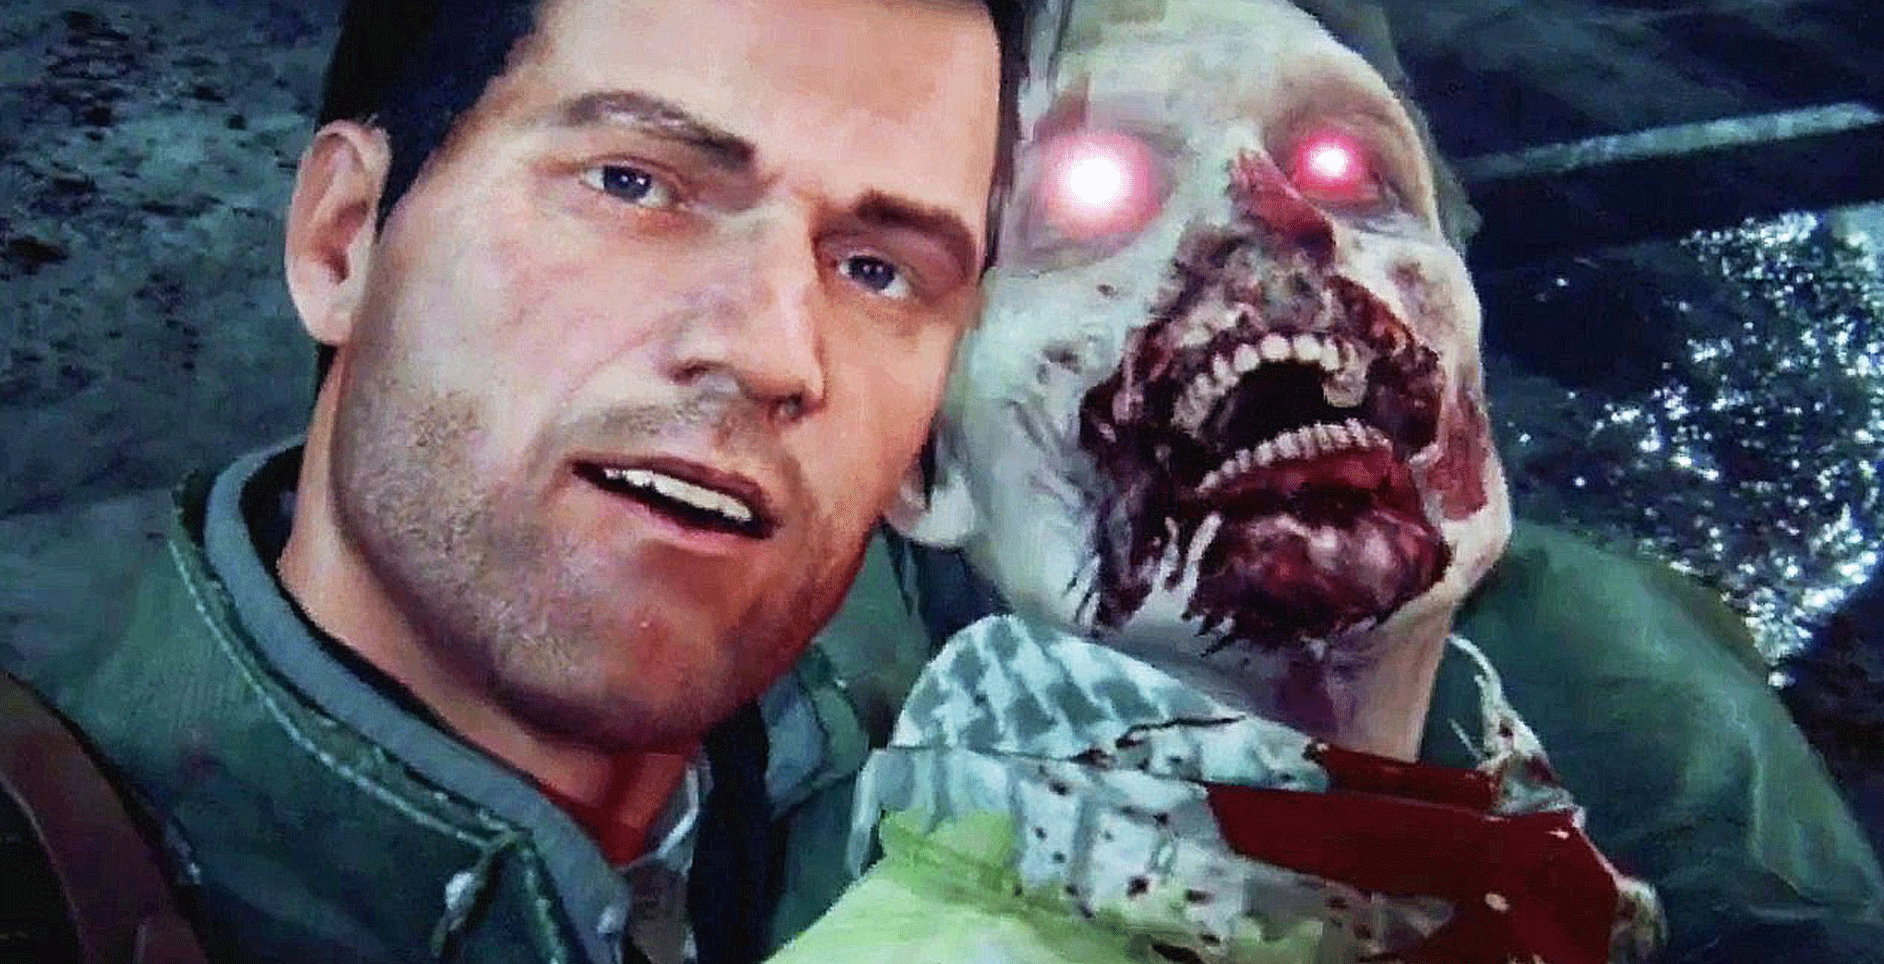 Cheapest Copy of Dead Rising 4